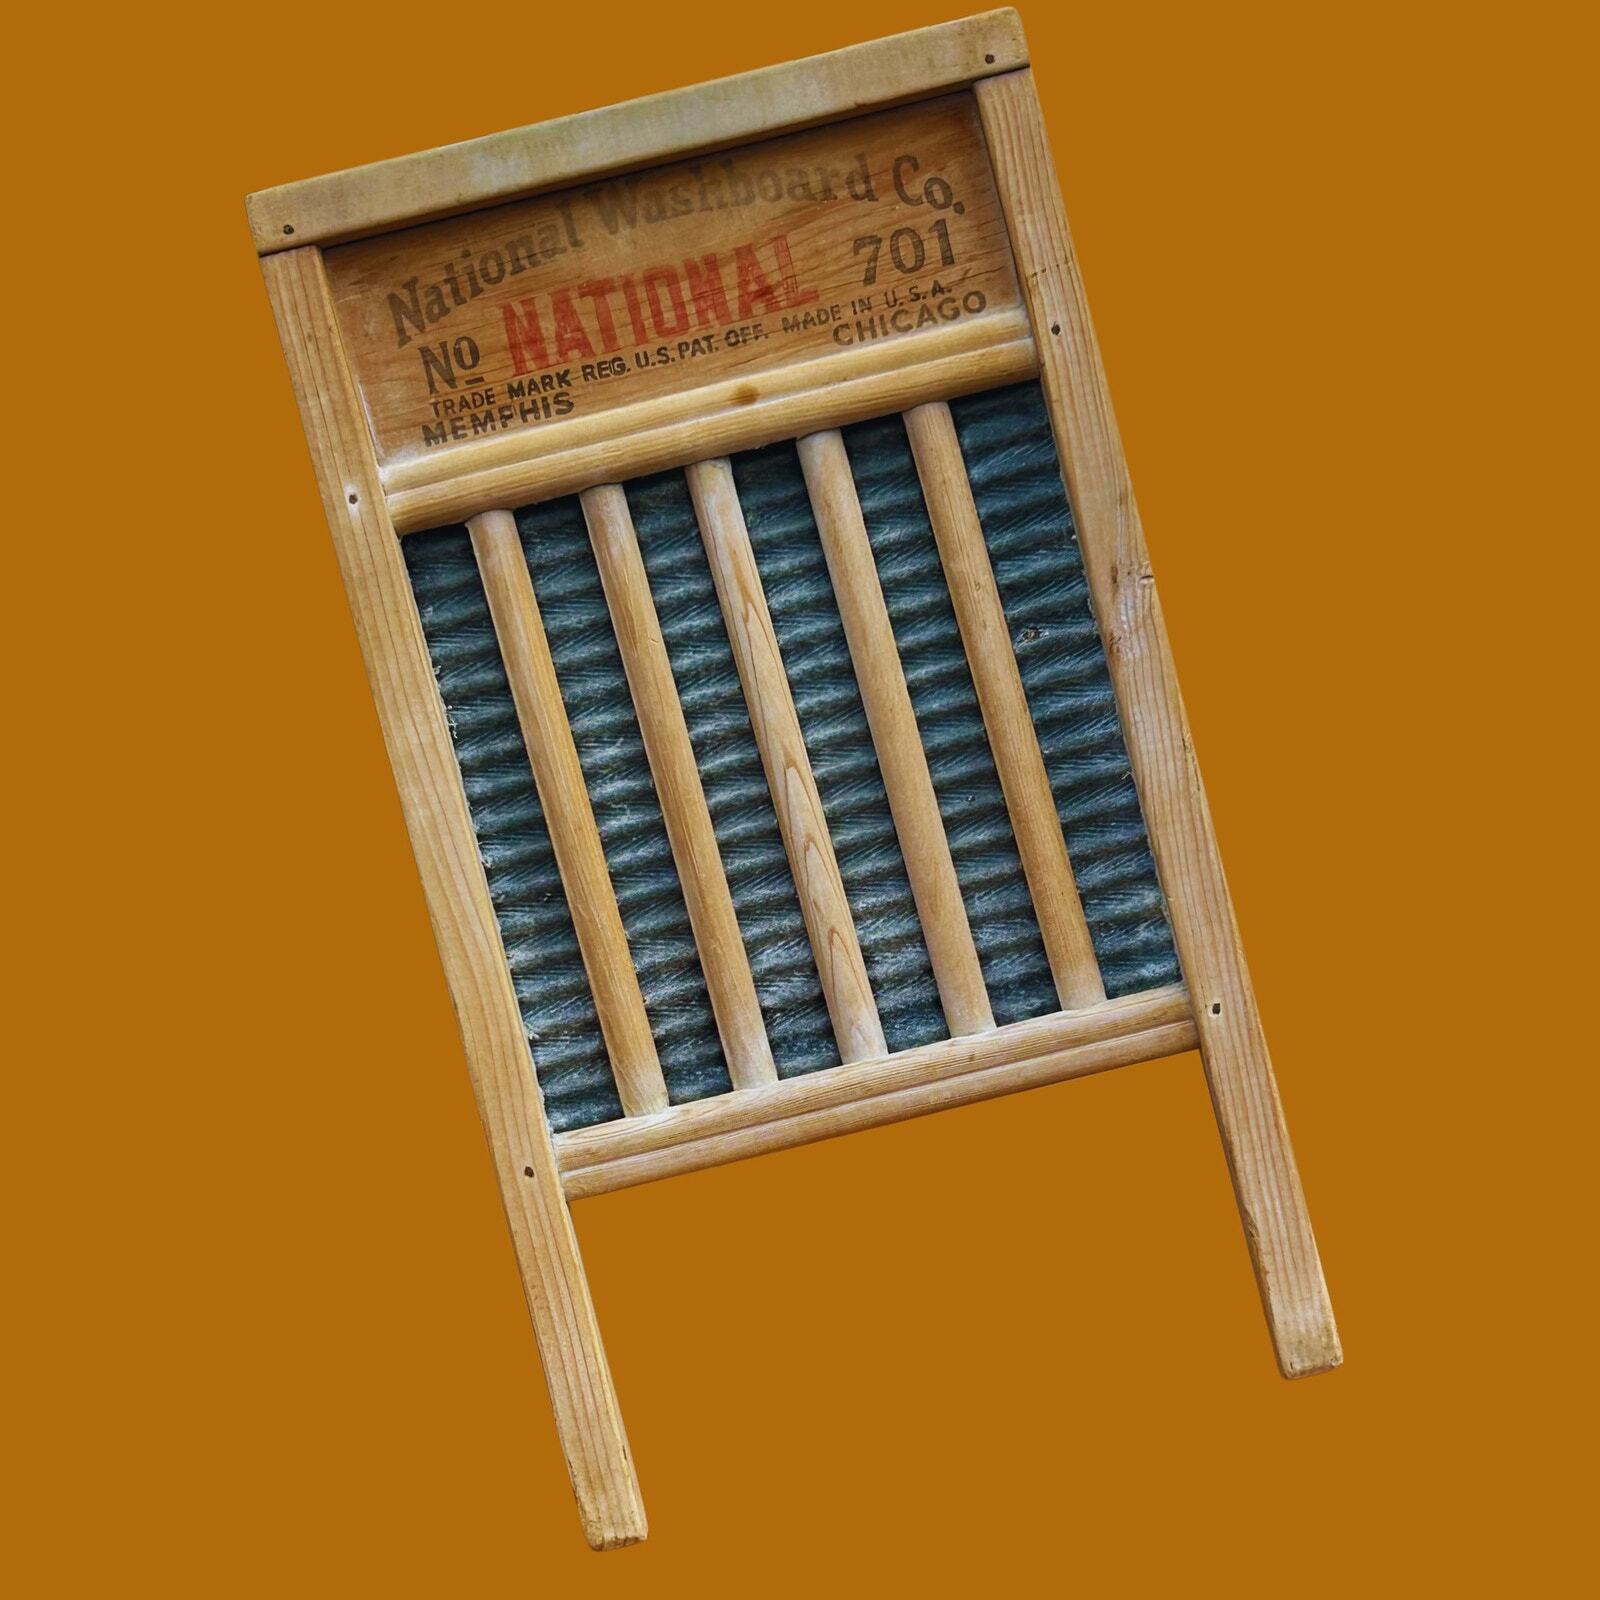 Vintage Washboard National #701 Primitive Rustic Galvanized Wall Hanging Laundry